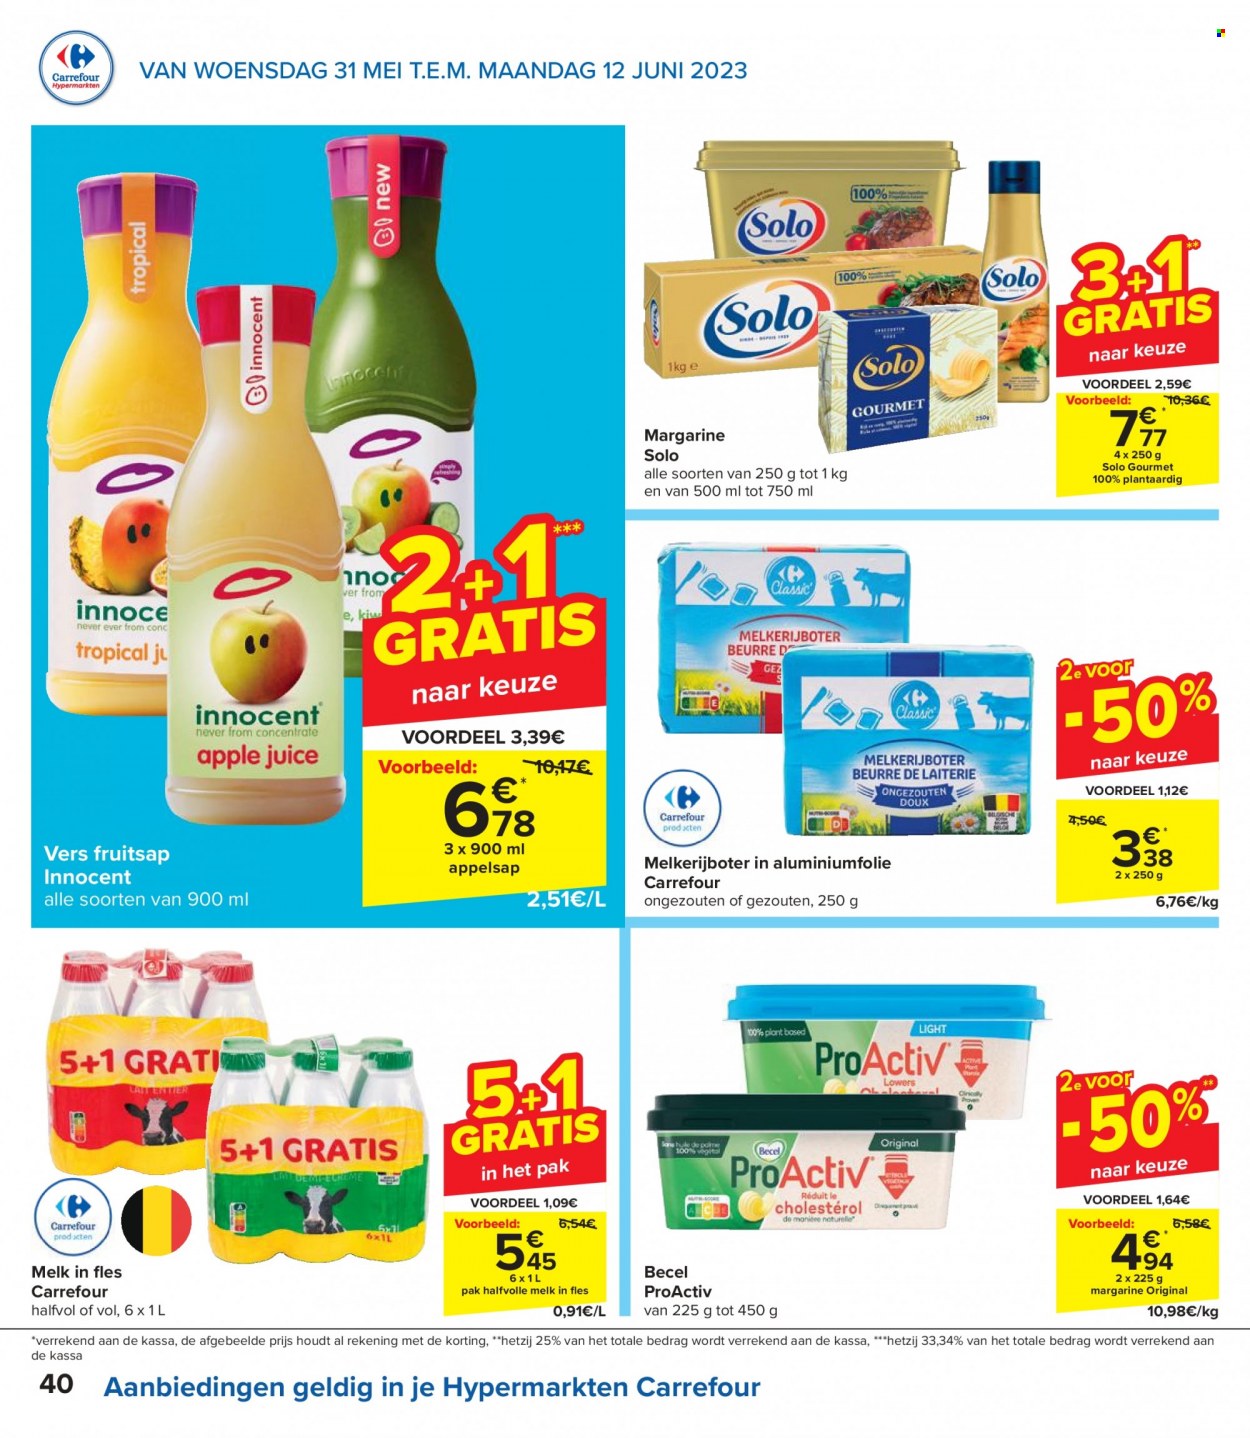 Catalogue Carrefour hypermarkt - 31.5.2023 - 12.6.2023. Page 40.